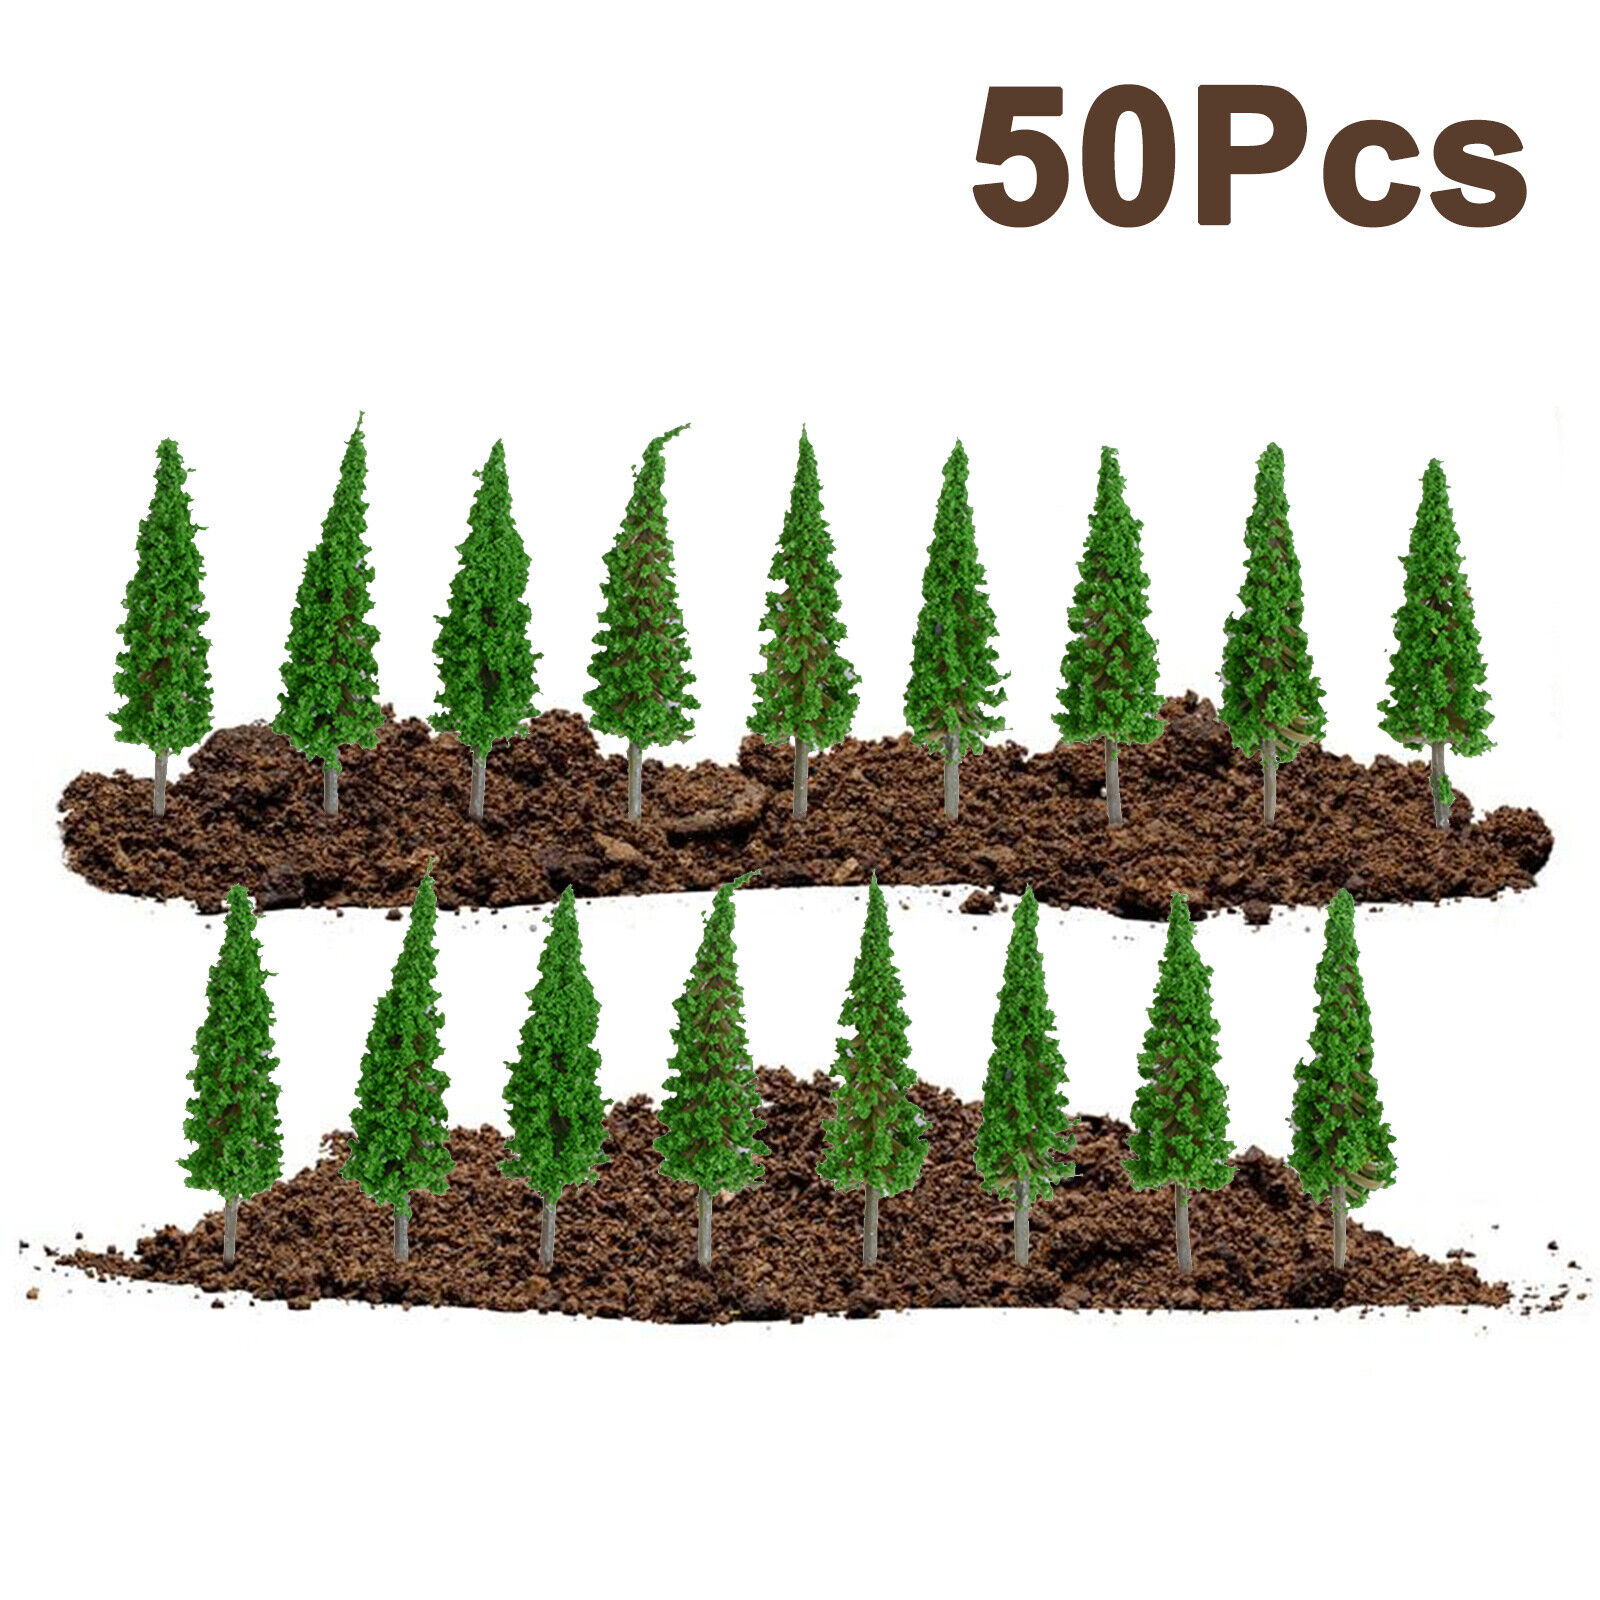 50pc Model Trees Train Railroad Diorama Wargame Park Scenery HO scale 55mm Mini Unbranded Does Not Apply - фотография #2